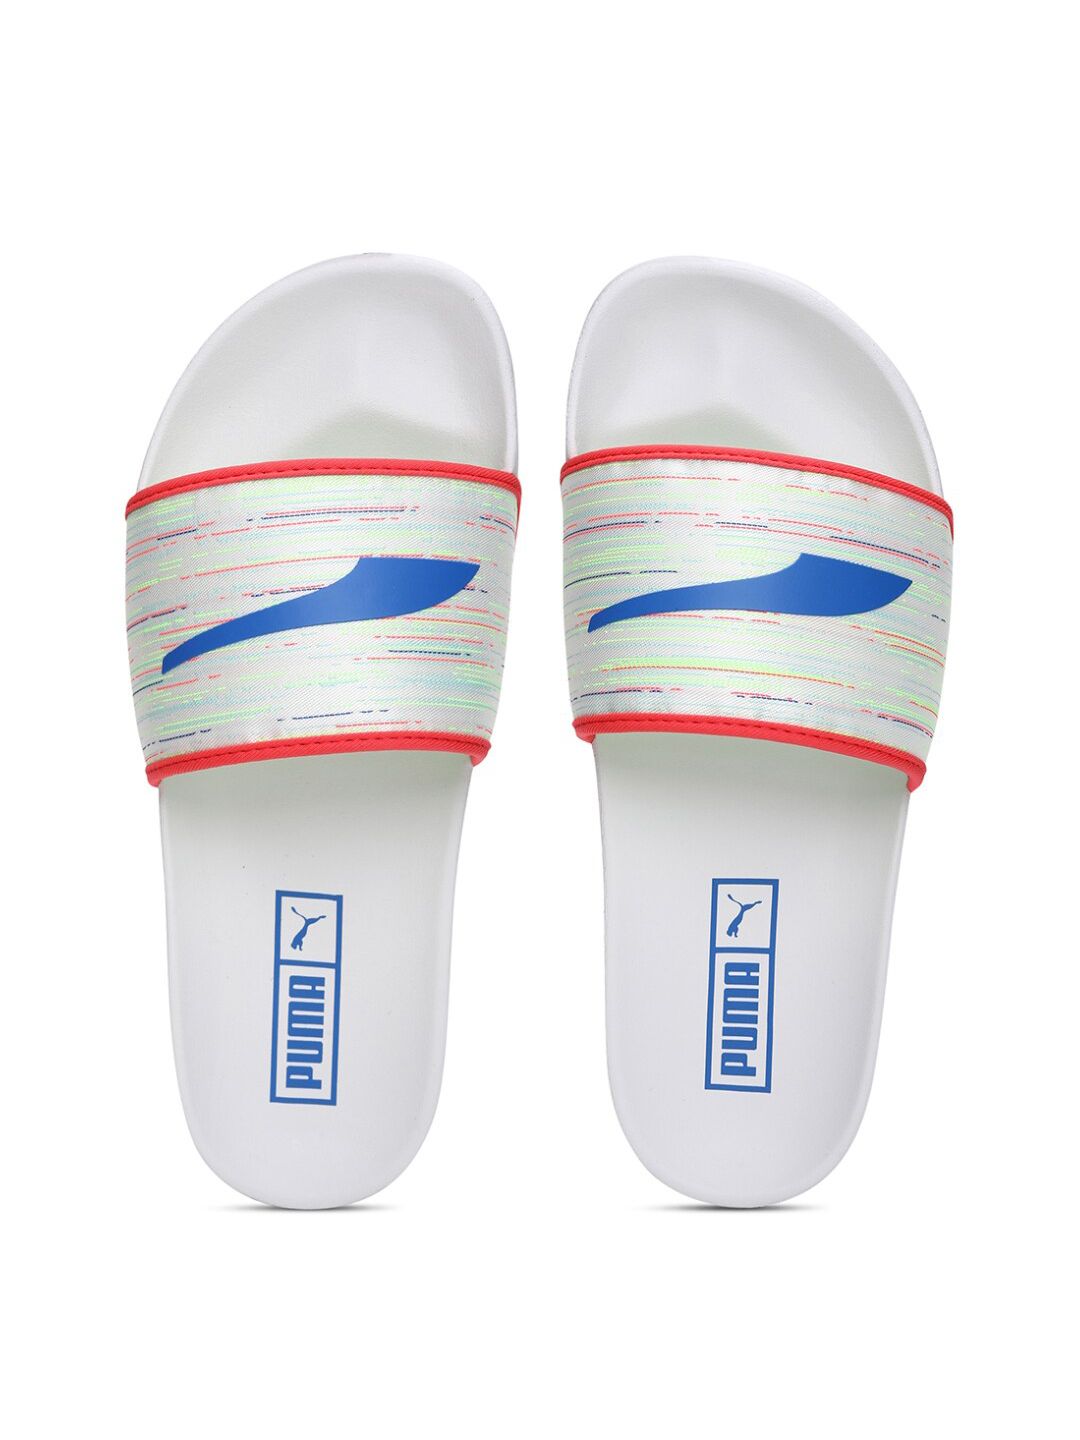 Puma Adult White & Red Printed Sliders Price in India